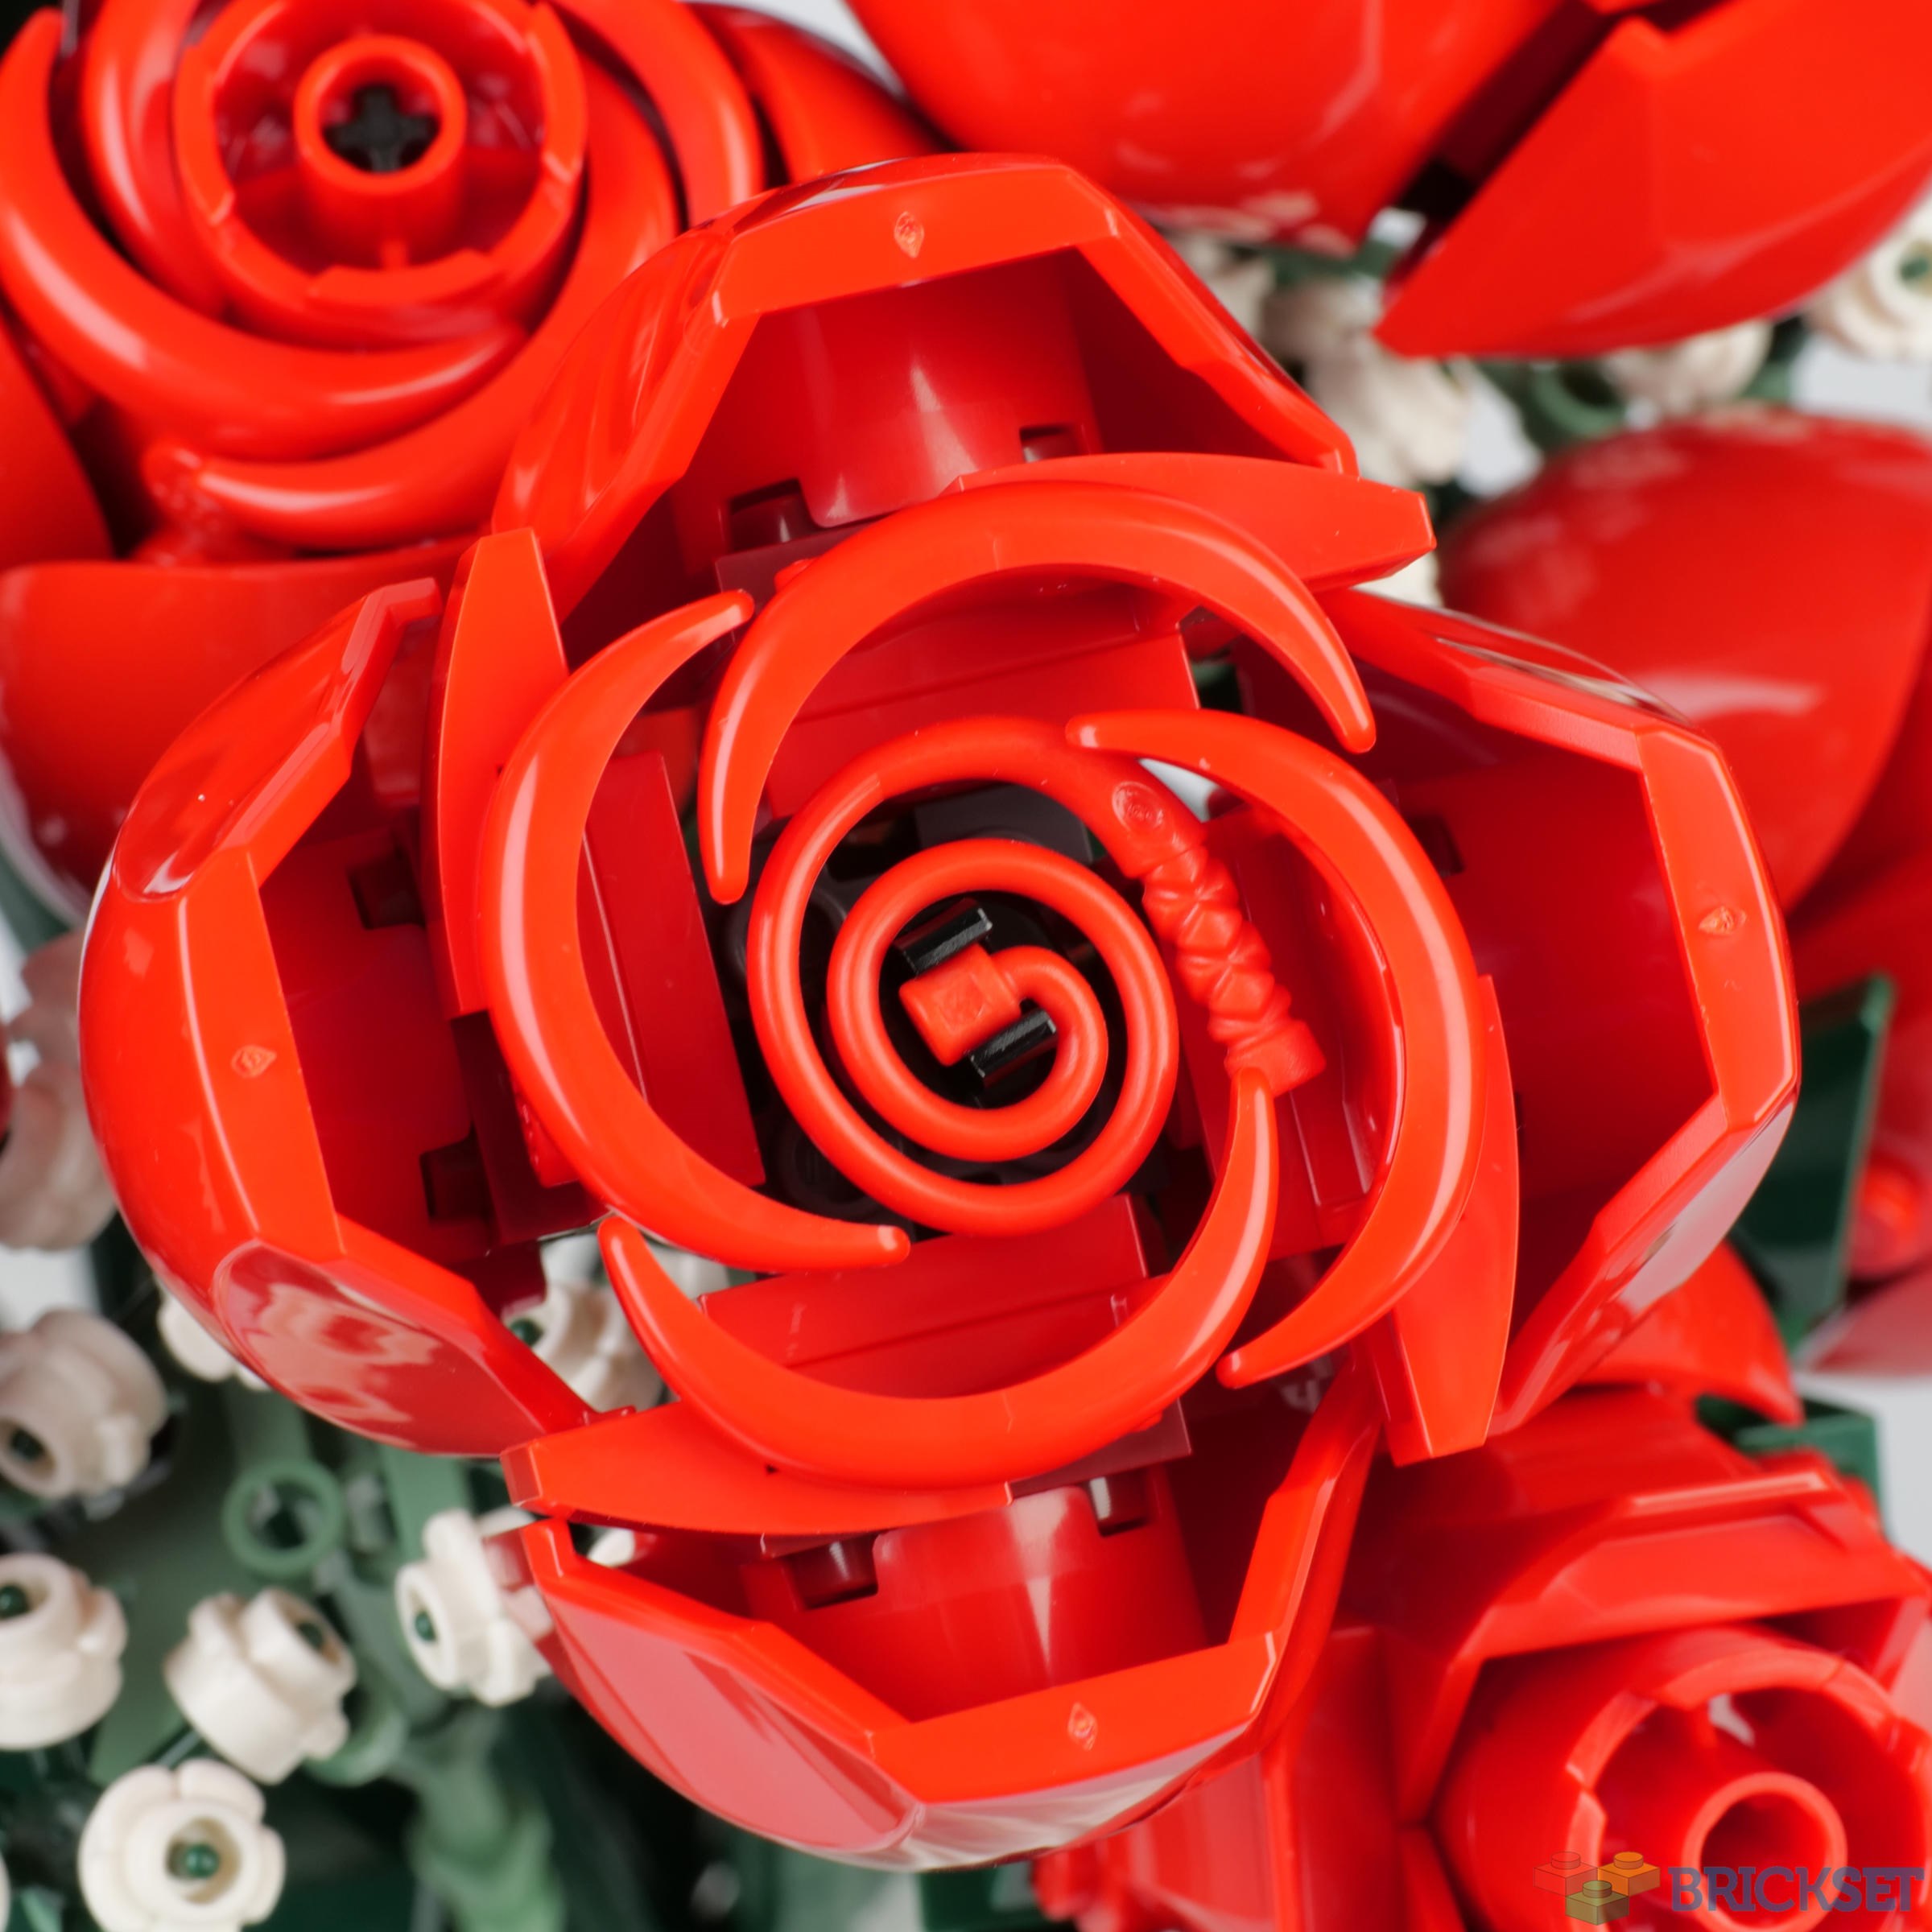 New Arrivals: LEGO Bouquet of Roses 10328 $59.99